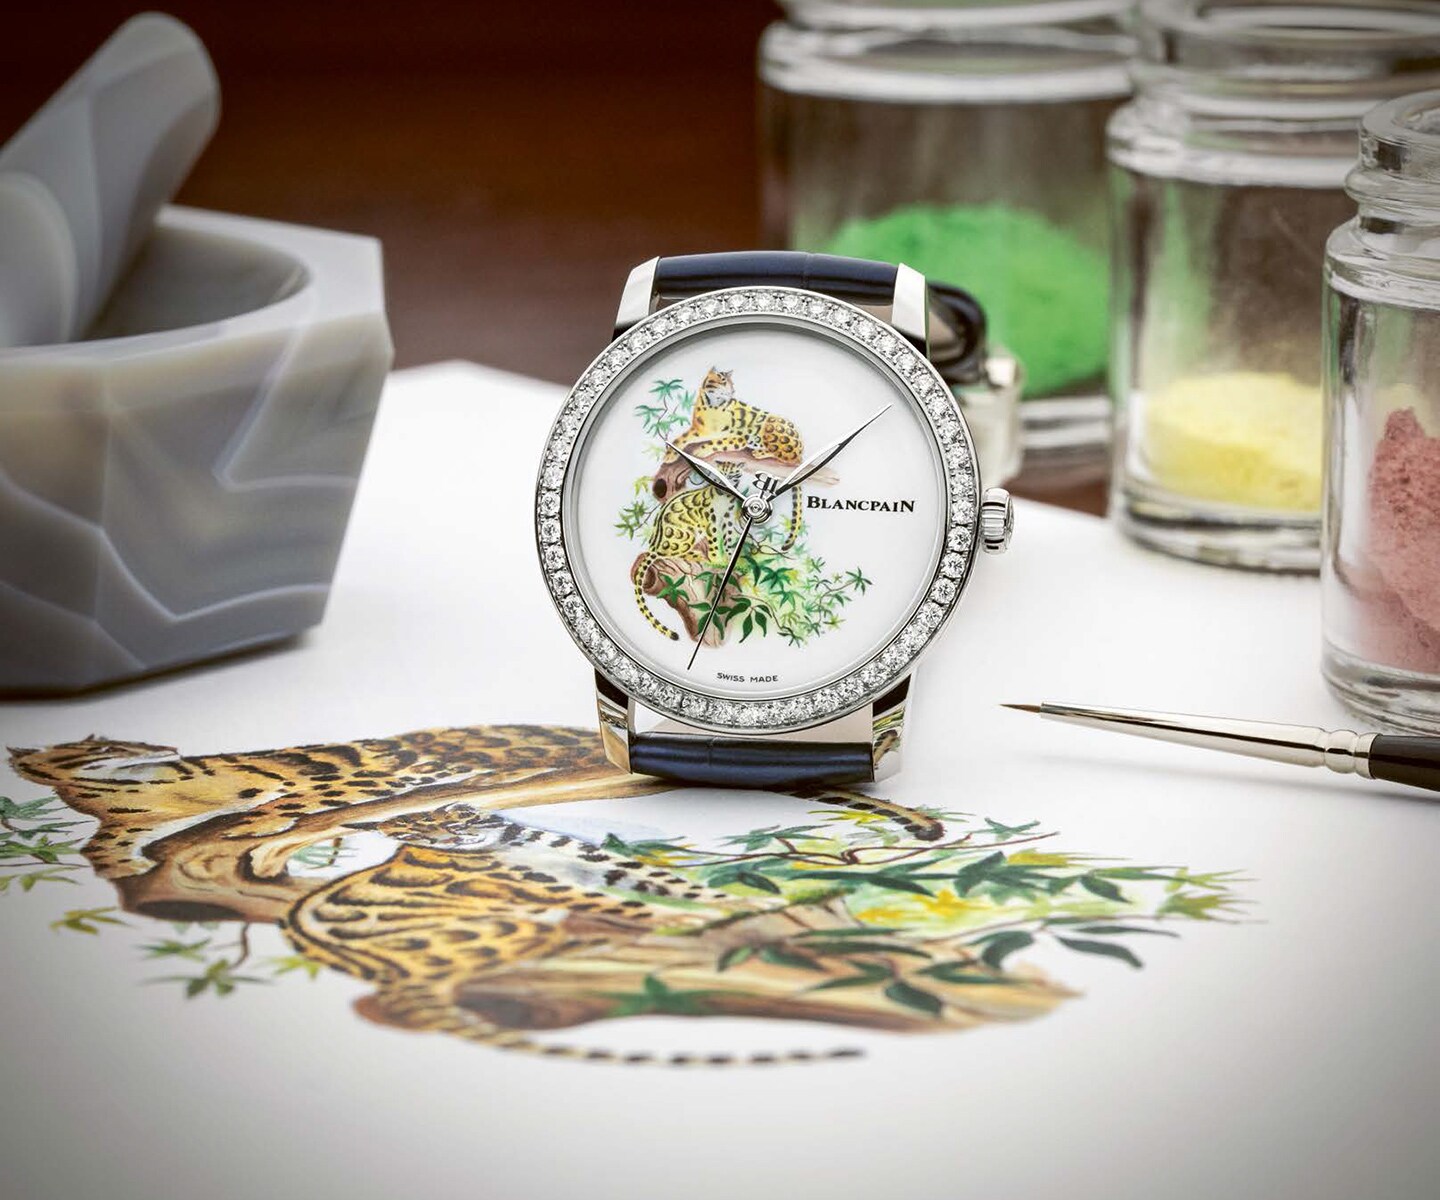 The clouded leopard in enamel-painted porcelain is framed by a 33 mm white gold case with a diamond-set bezel.
